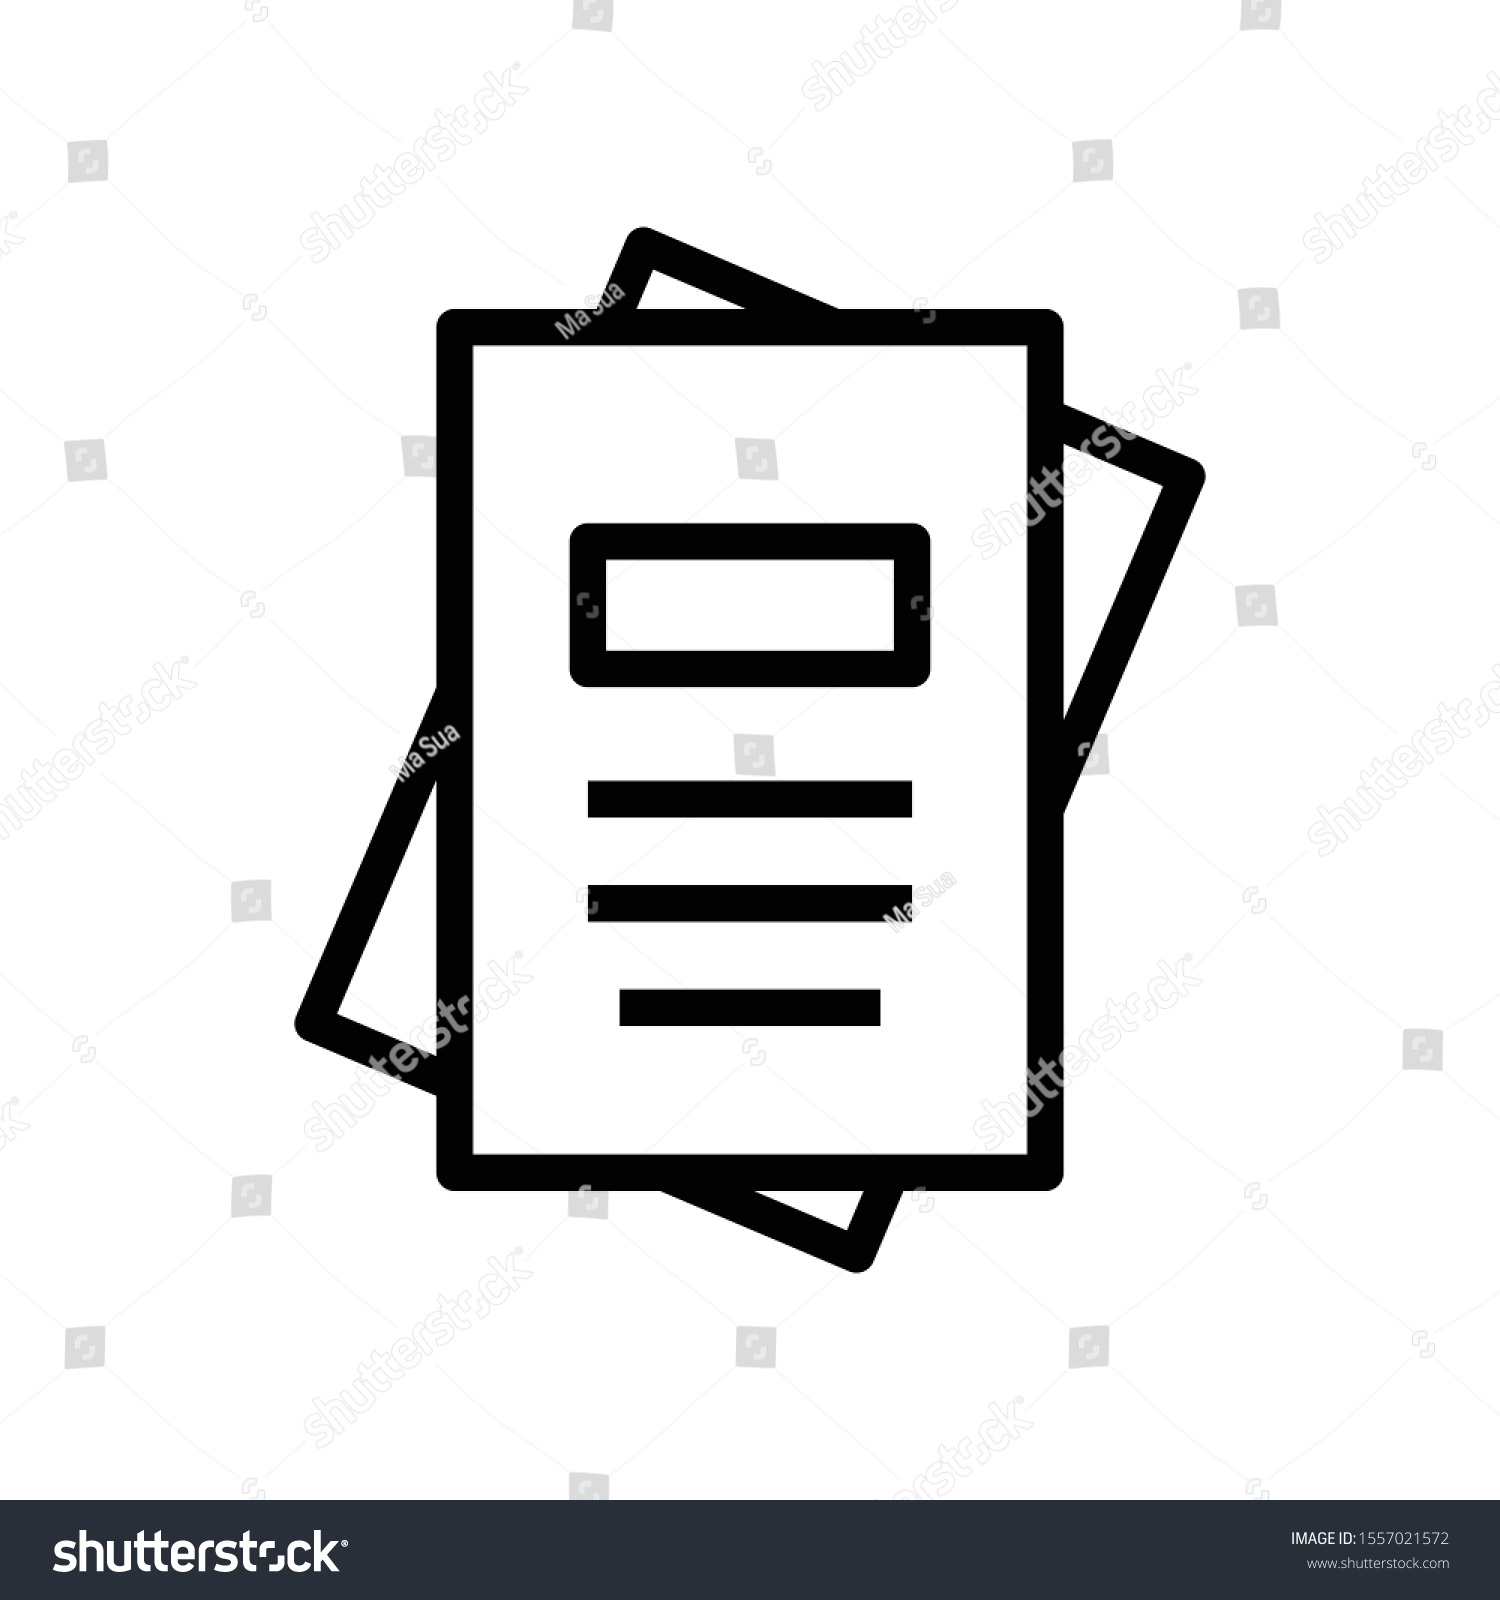 assignment outline icon